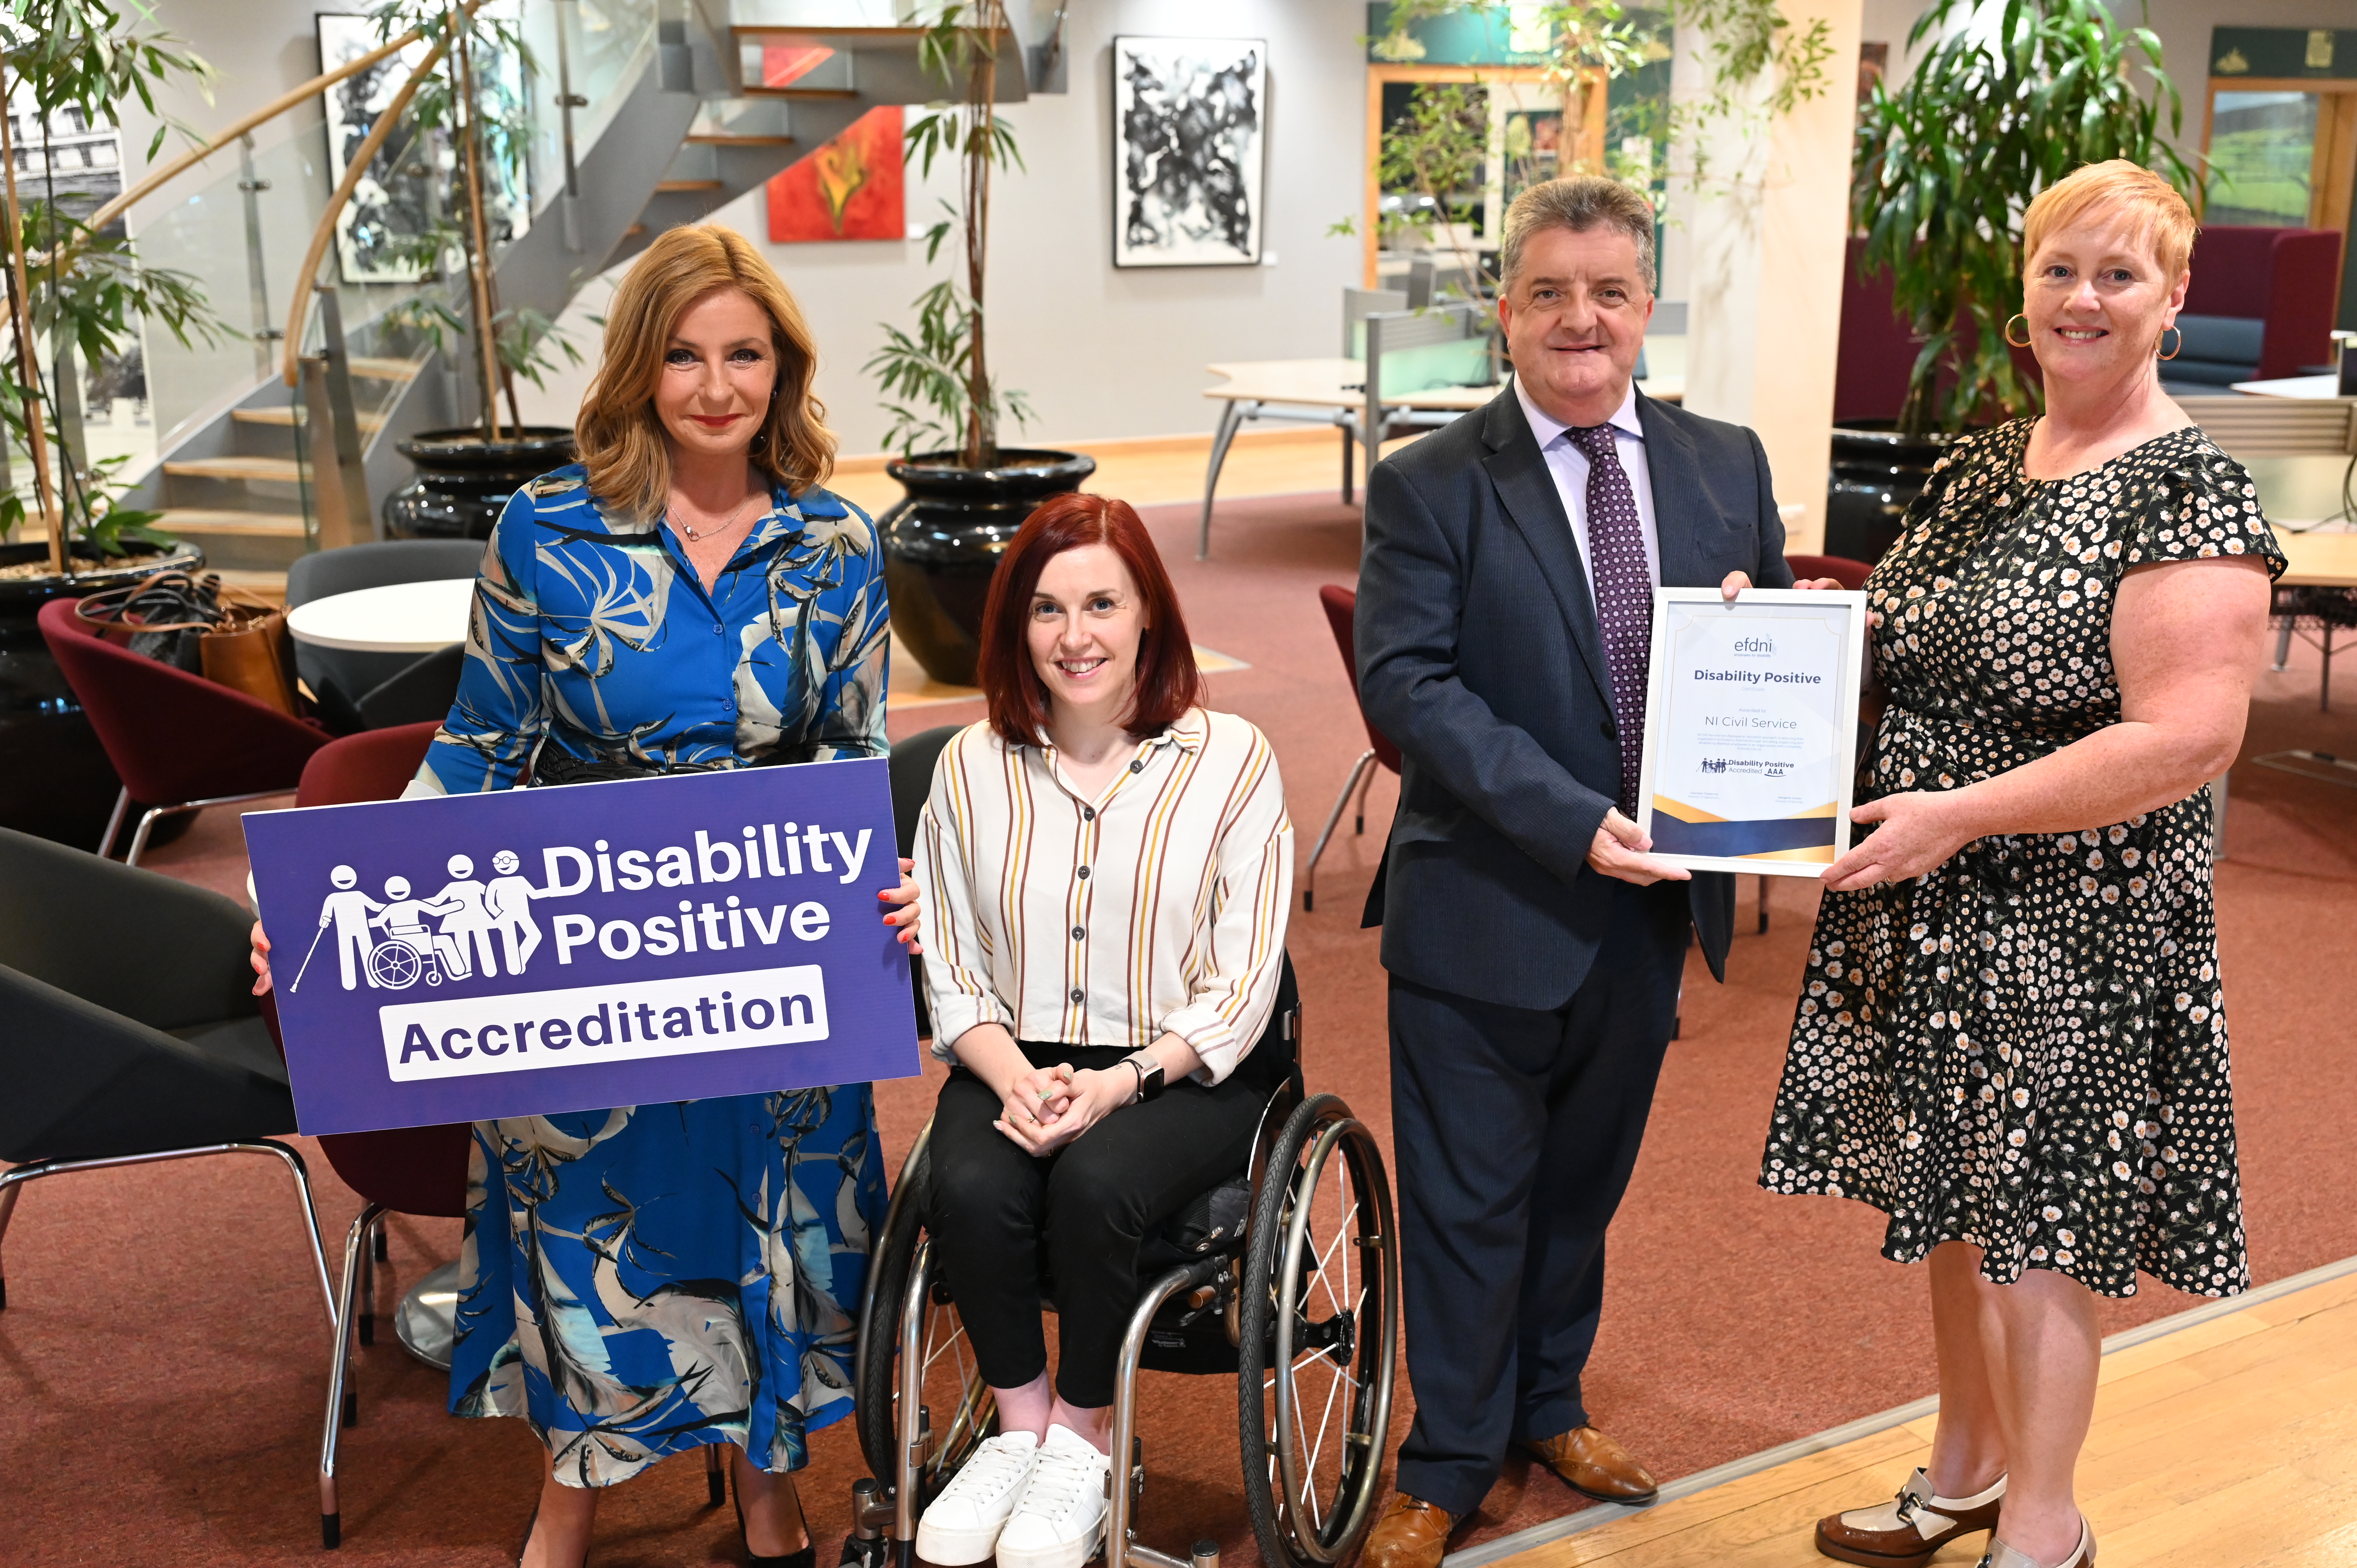 Photograph of Civil Service colleagues receiving the Disability Positive accreditation